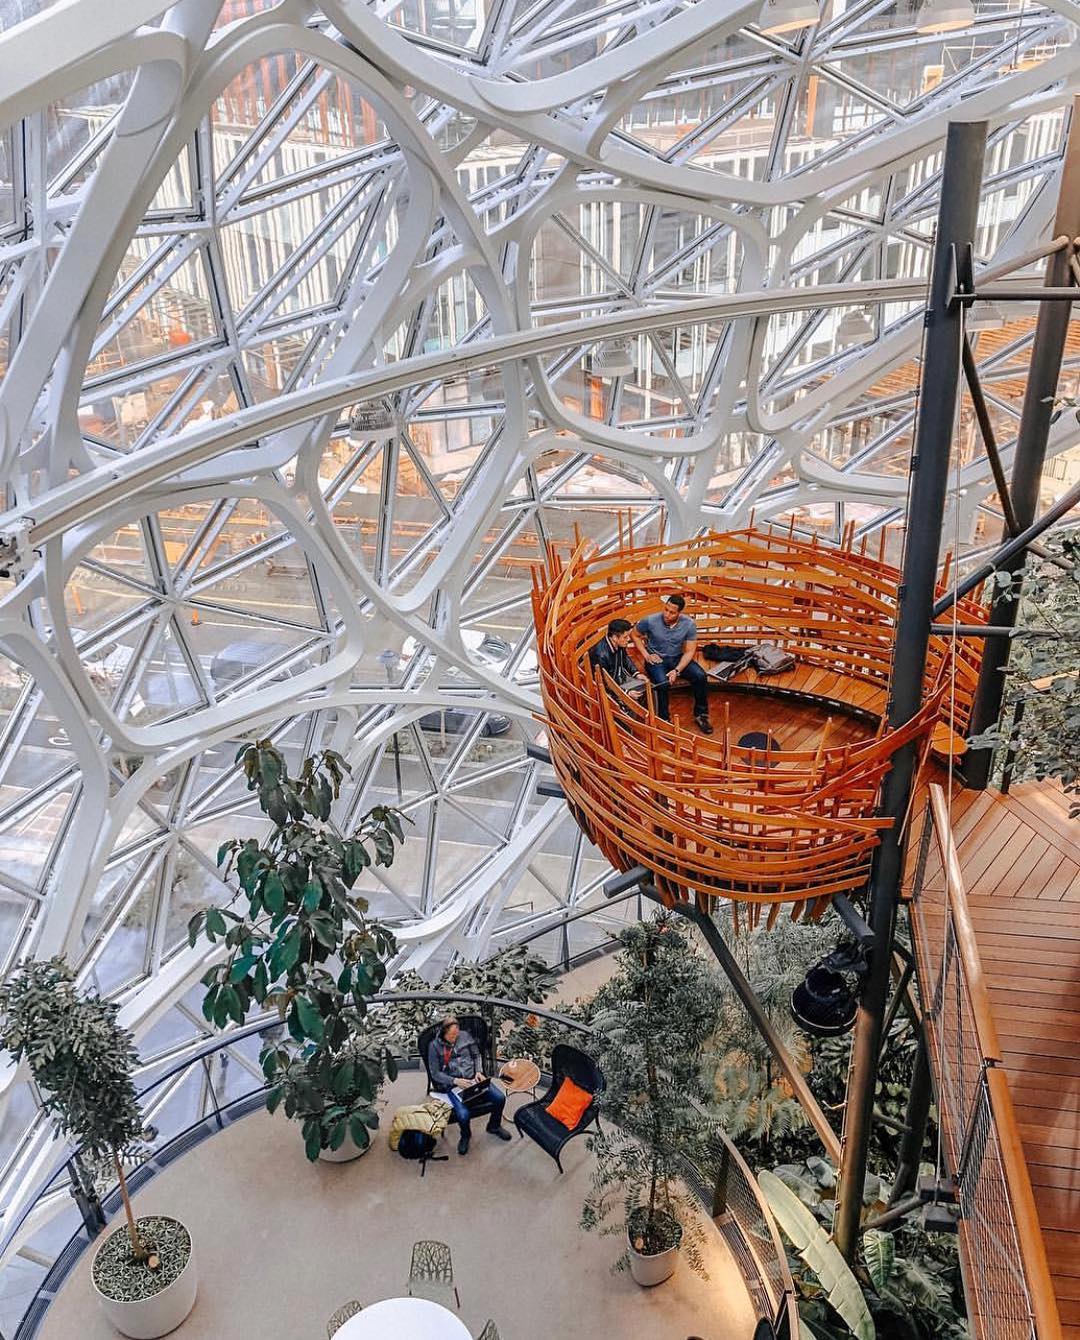 Tree house inside the Amazon Spheres. Photo by Instagram user @curiocityseattle 